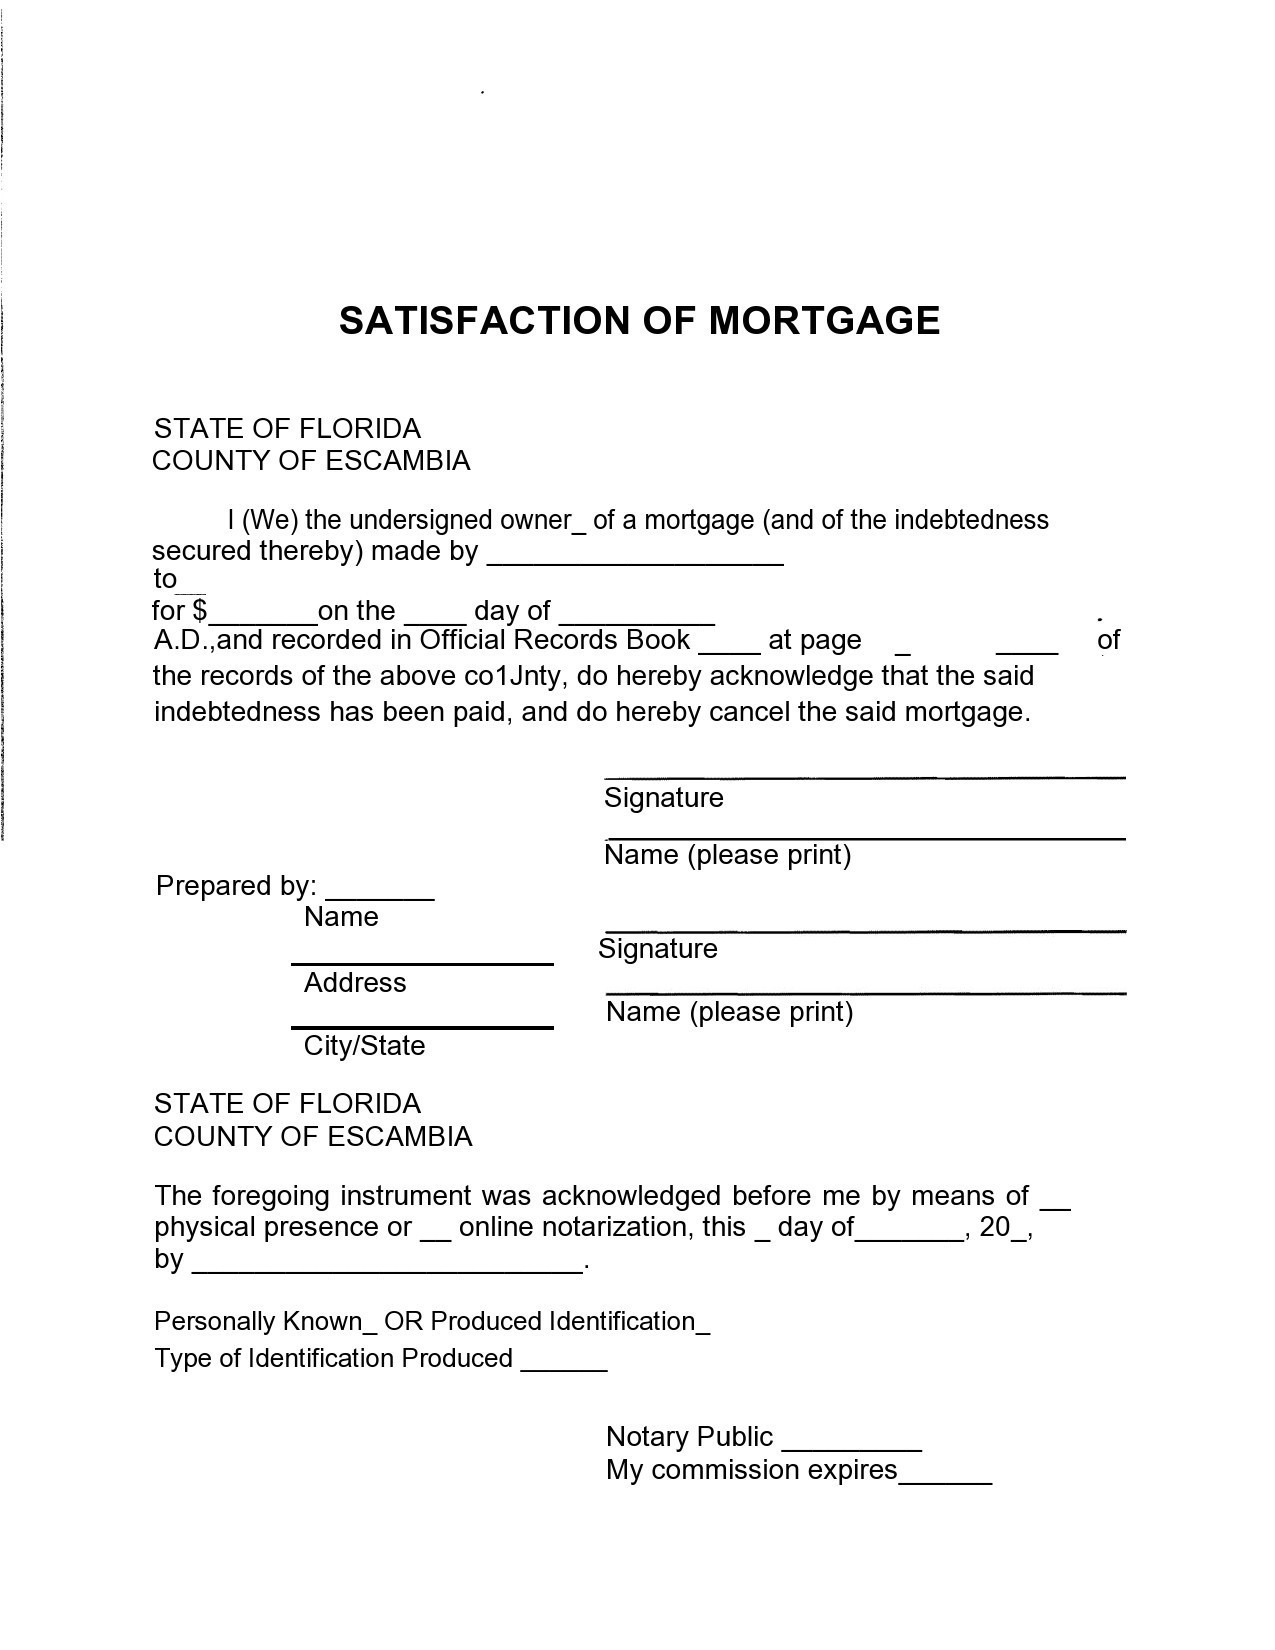 Free satisfaction of mortgage 36